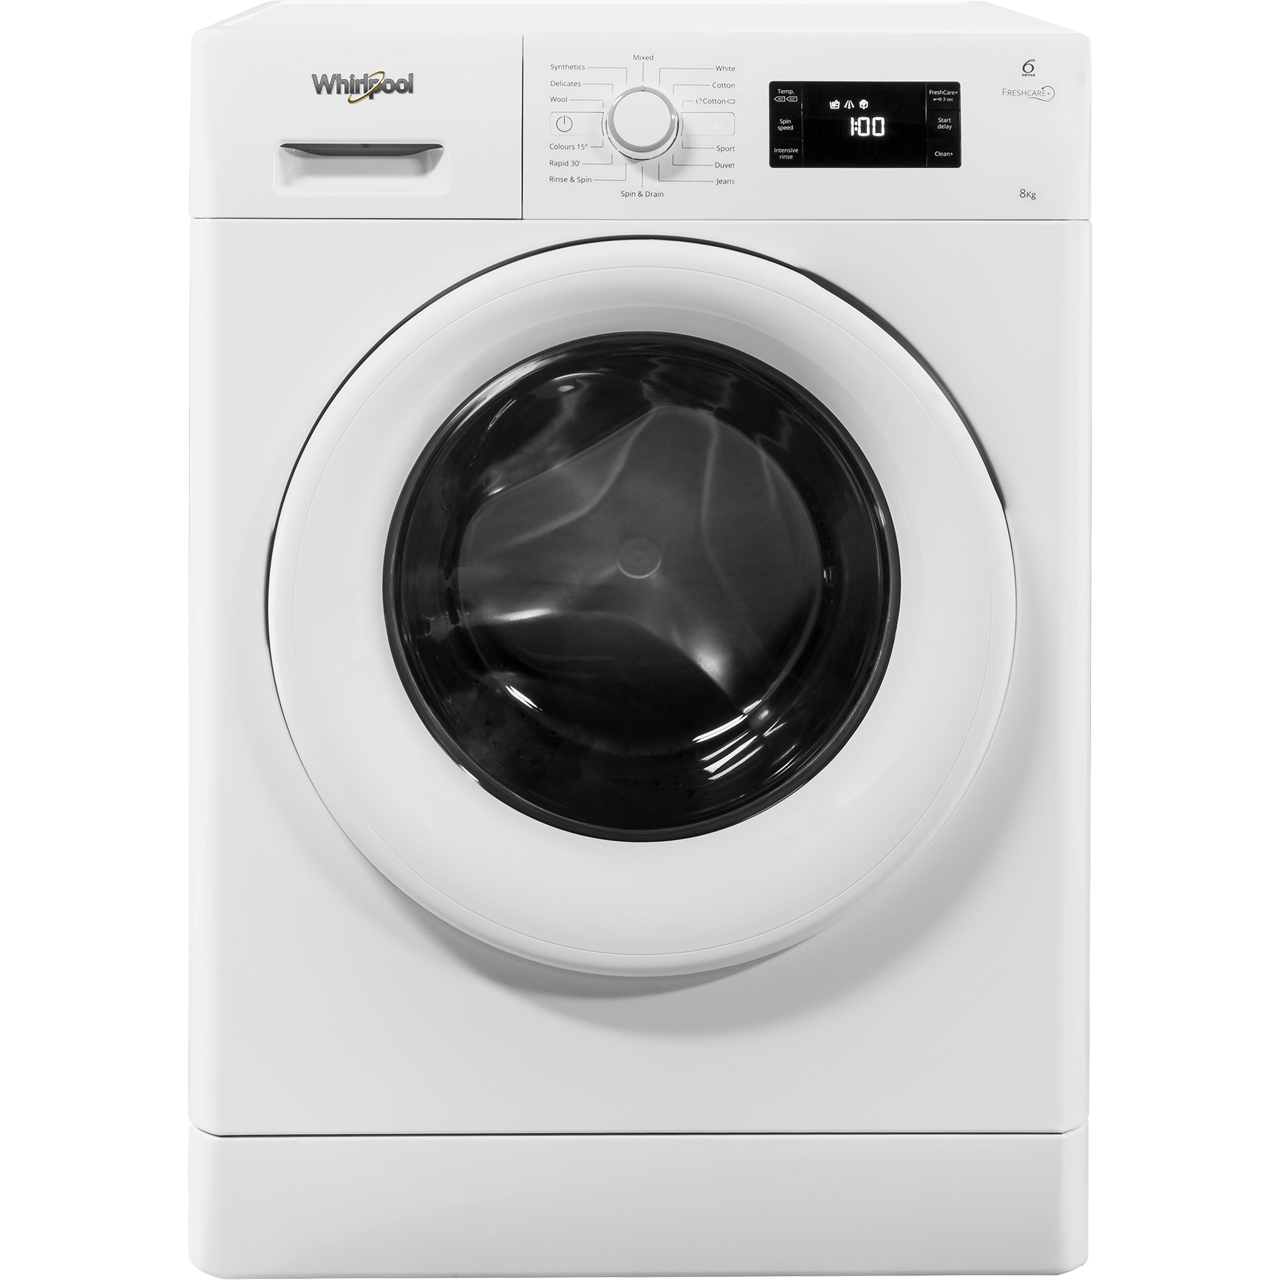 Whirlpool FWG81496W A+++ Rated 8Kg 1400 RPM Washing Machine White New